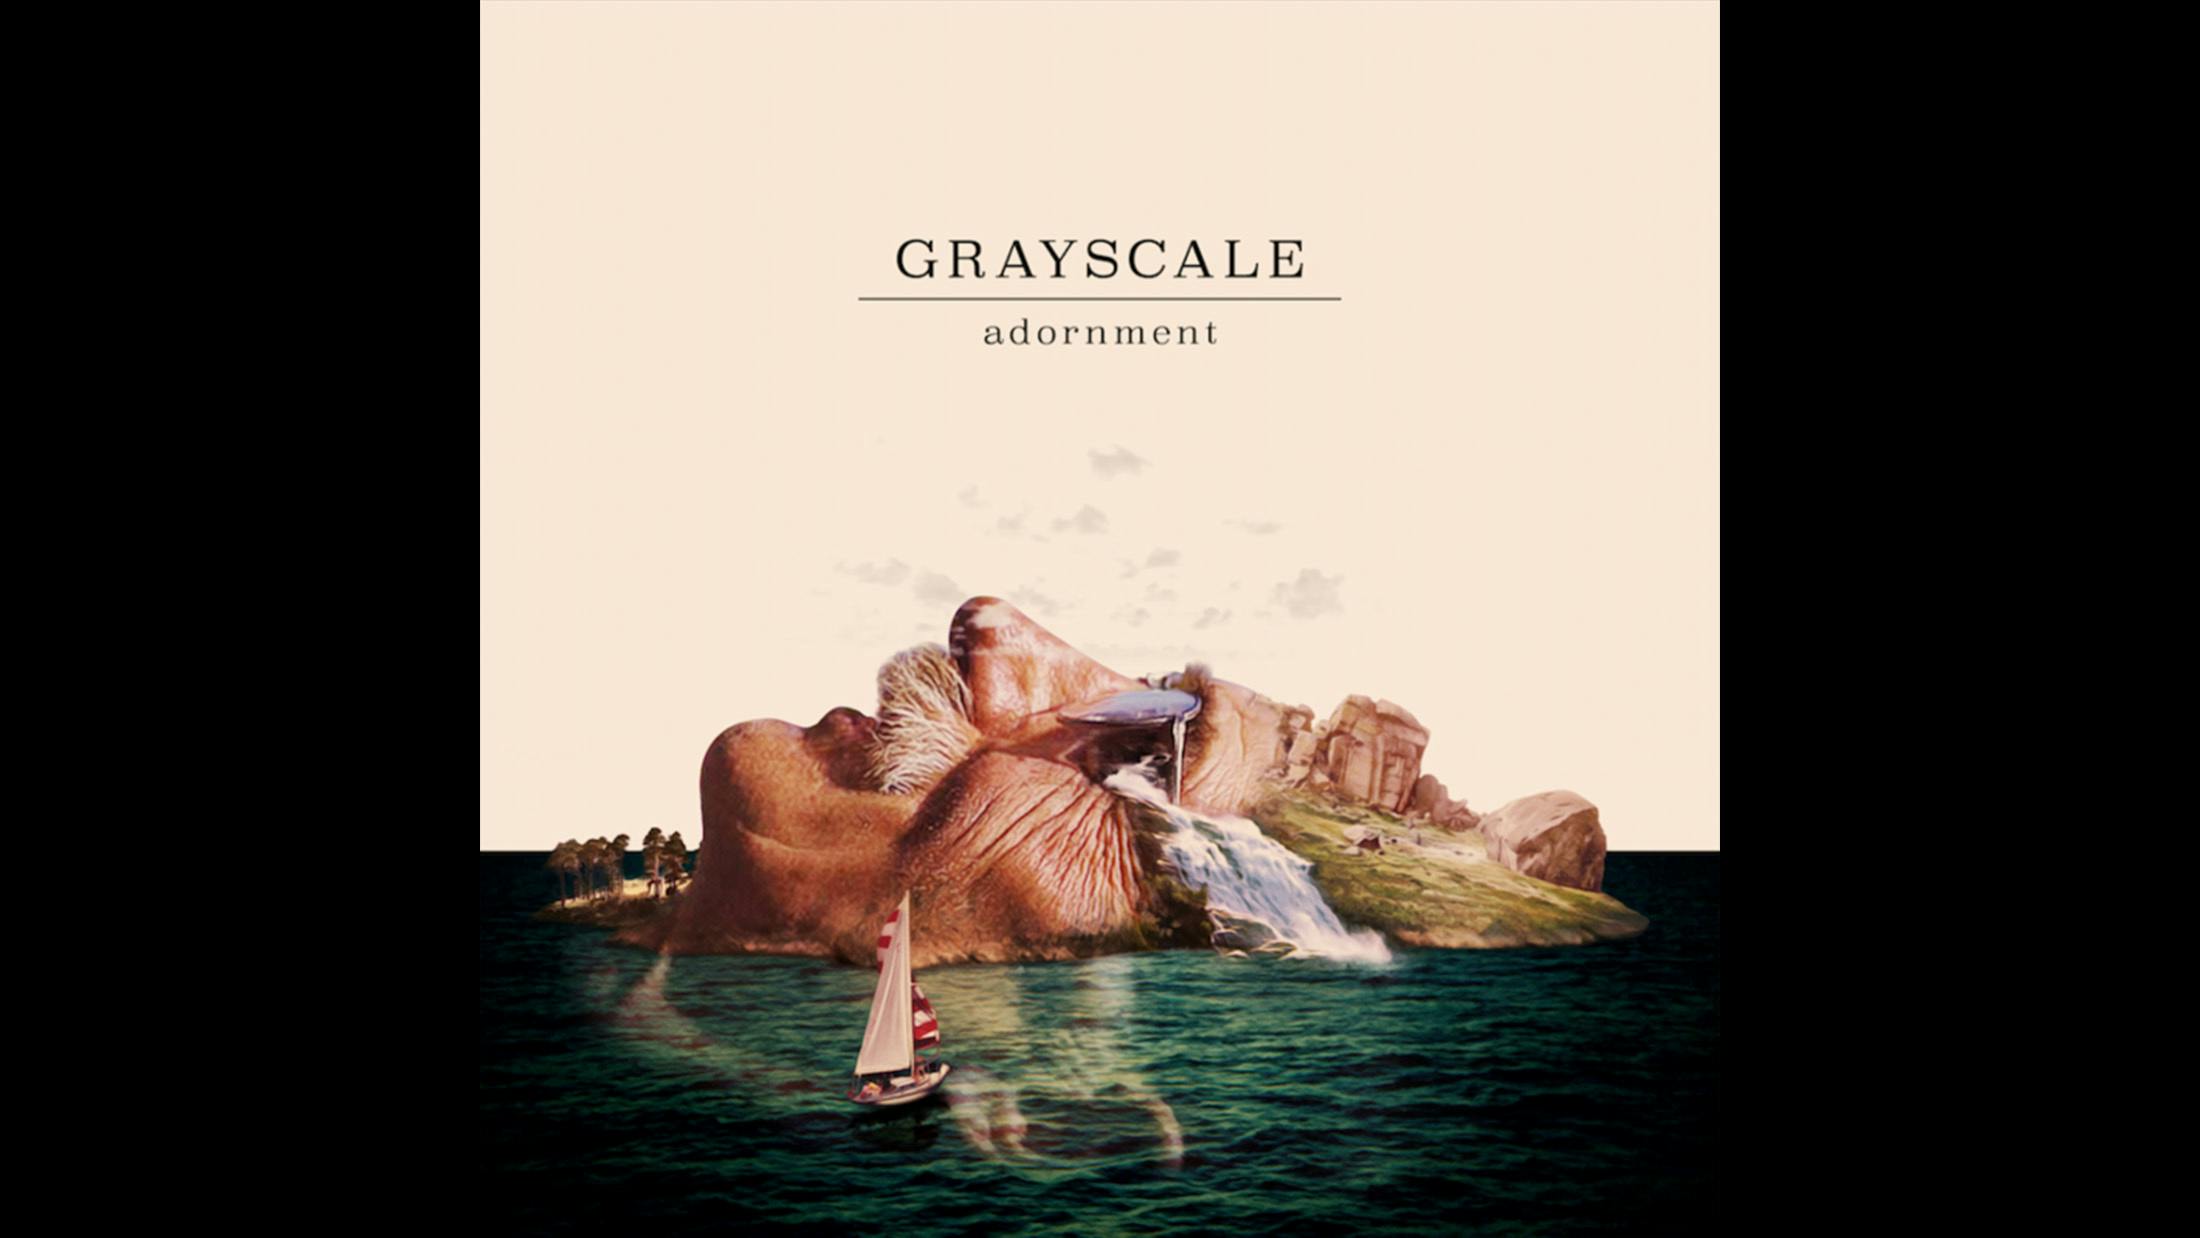 Philly five-piece Grayscale might just be the best thing to happen to pop punk in ages. Sophomore album Adornment flew somewhat under the radar in the UK on release, but the reputation of these guys is growing by the day, with a debut tour on British soil scheduled for March next year in support of their buddies As It Is. Adornment has everything you’d want from a pop-punk record in 2017: it’s got catchy hooks (see lead single Atlantic) and tender balladry (the heart-wrenching Forever Yours); but beneath the sheen lies a band with real intelligence. Pop punk this may be, but derivative it sure ain’t. Check out killer cuts like Mum and Slept – the latter of which incorporates elements of Irish folk – and you’ll see what we mean.